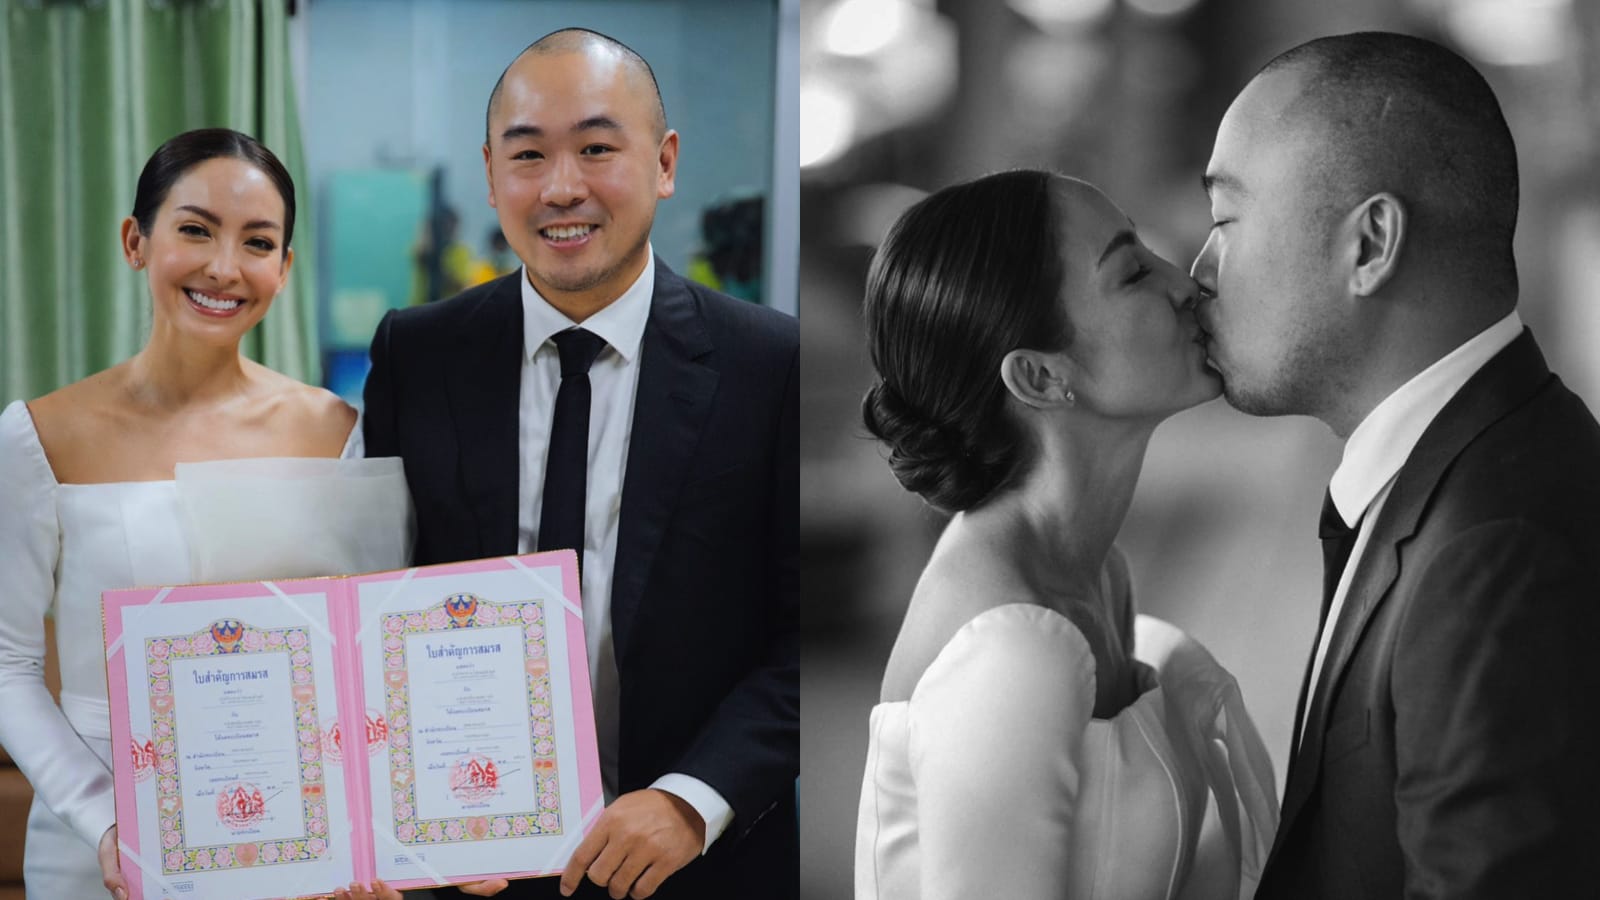 Ase Wang Finally Married Her Chinese-American Businessman Beau After A 3-Month Delay